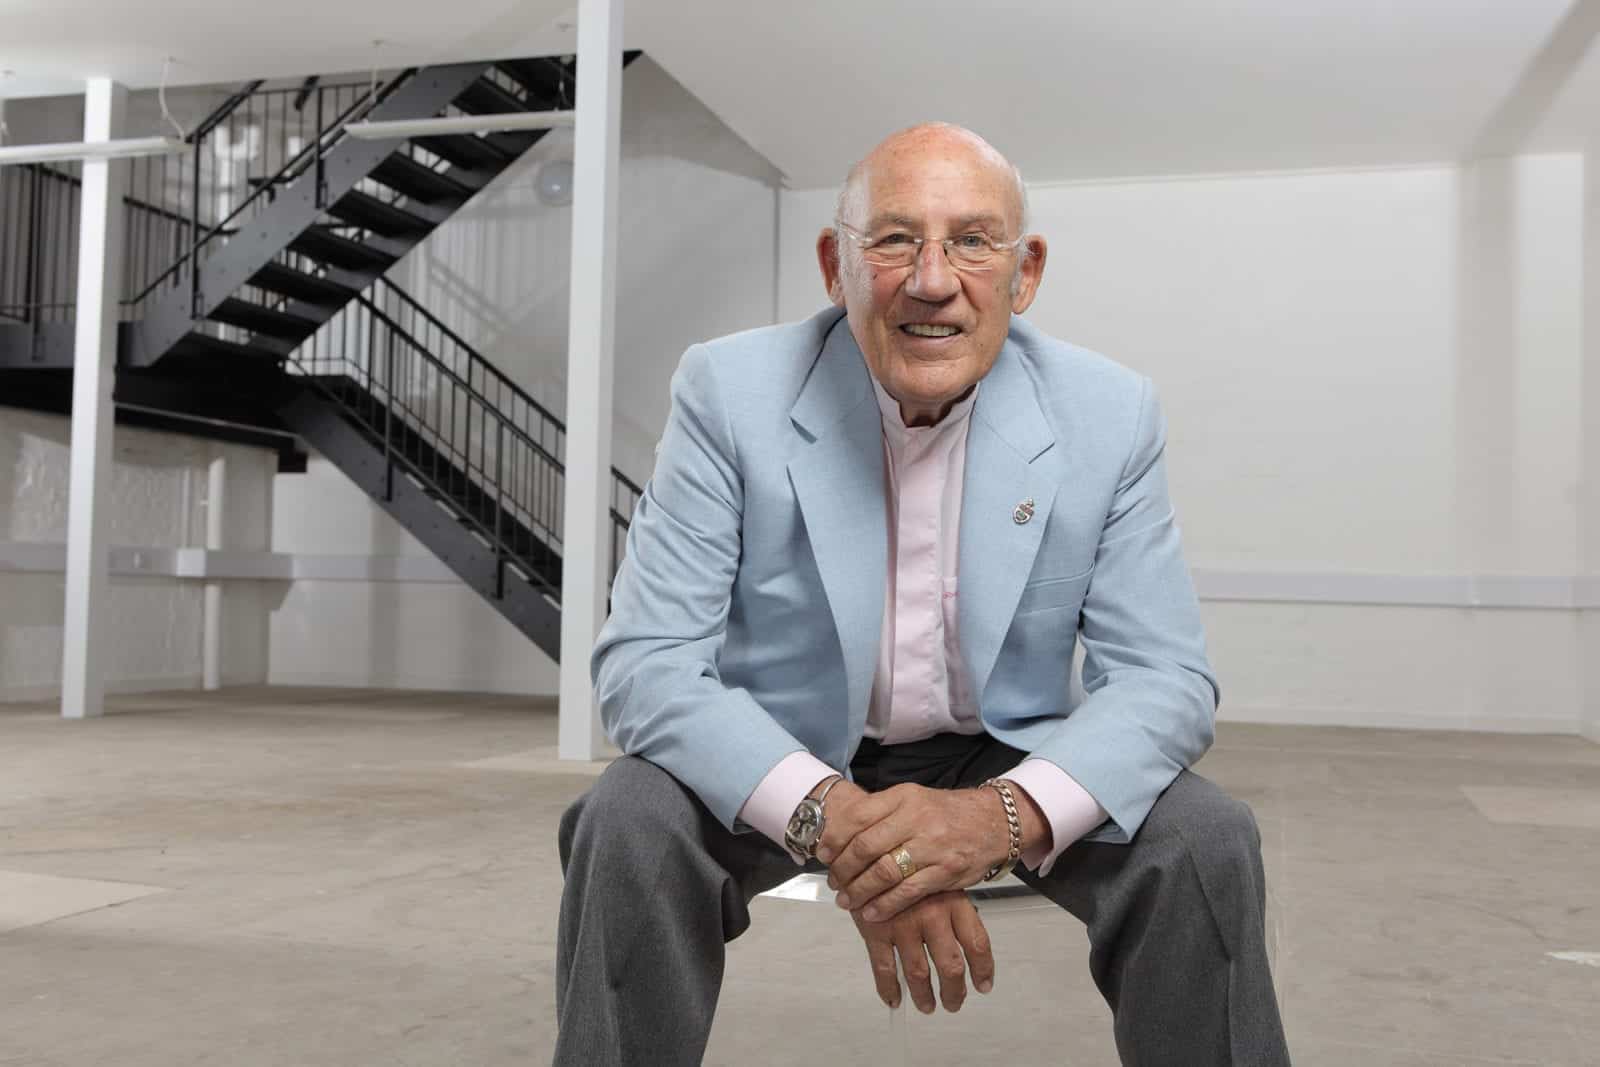 Stirling Moss at the Motor Sport offices in 2009